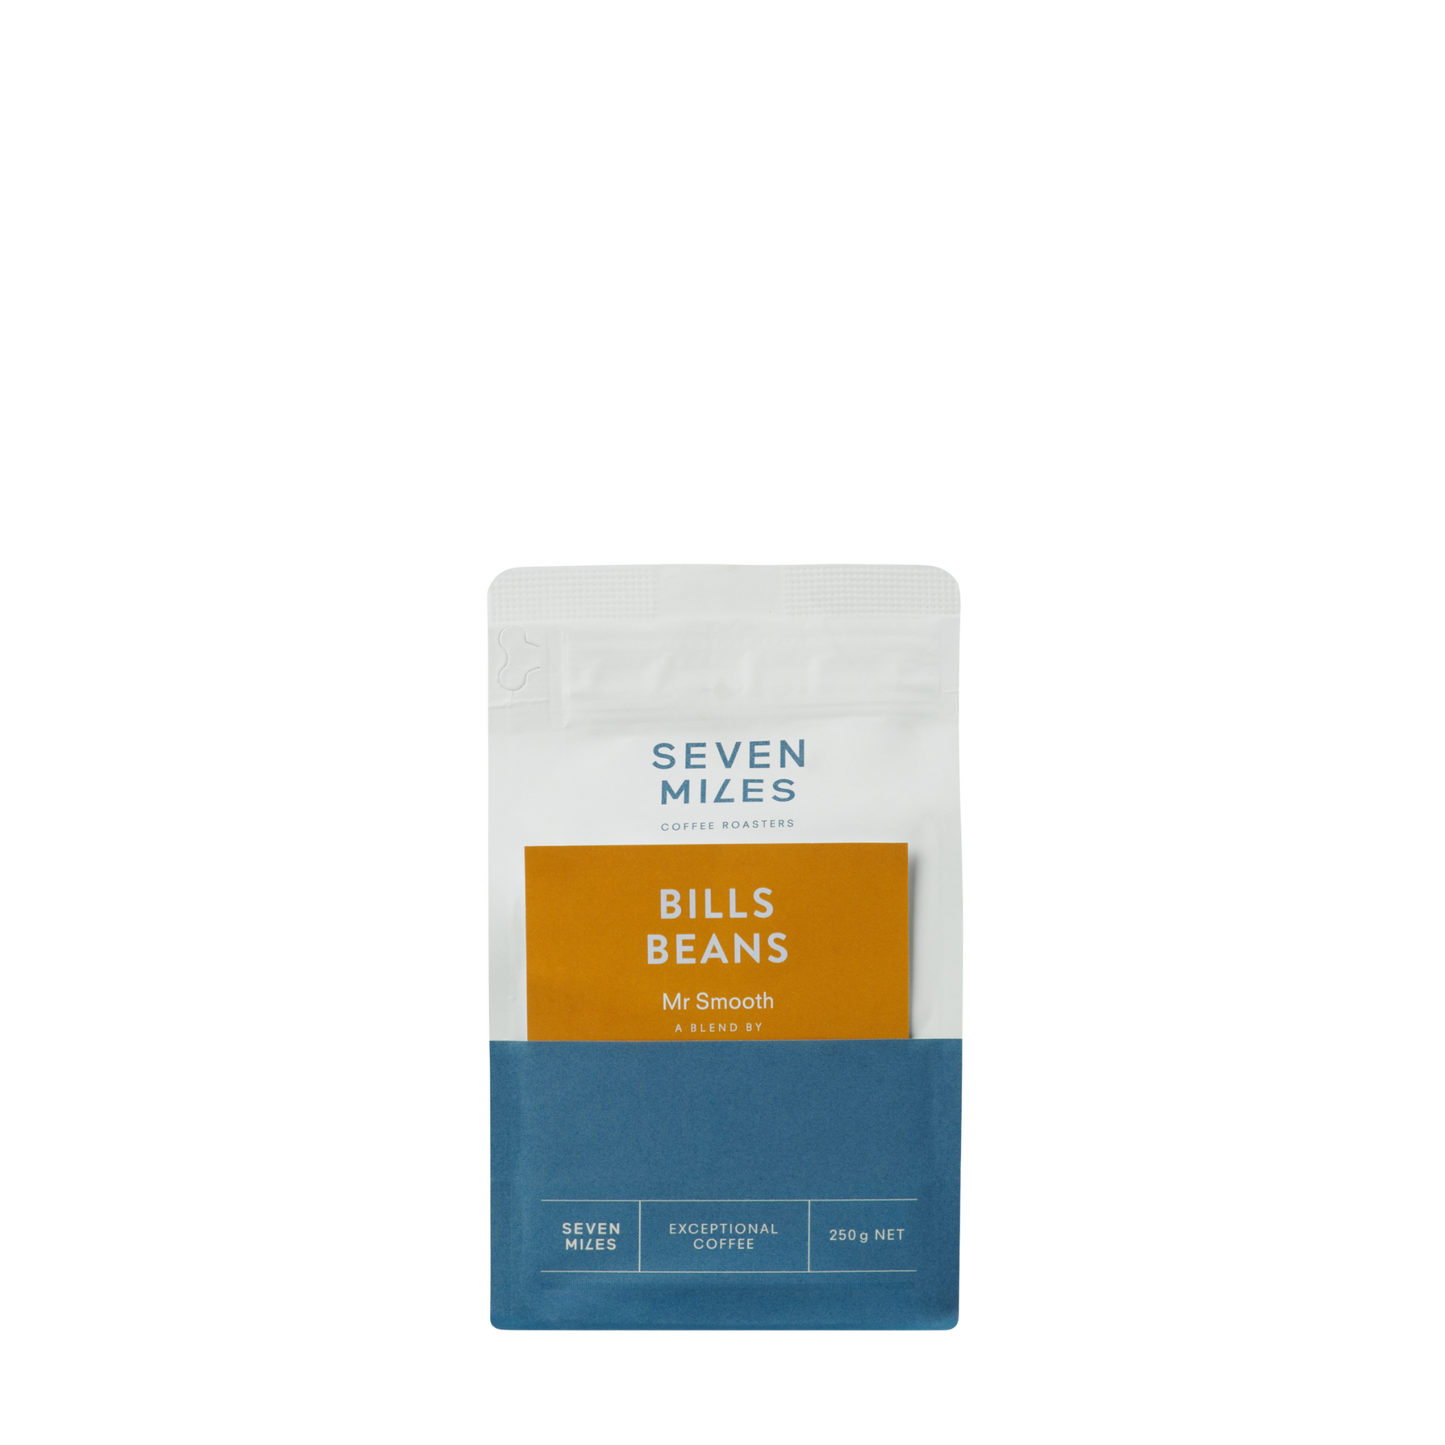 Seven Miles Coffee 250g Mr Smooth is exactly that, a smooth blend which carries notes of silky caramel, juicy apricot, barley sugar, and stewed stone fruit with a long chocolaty finish. It’s a great all-rounder being perfect for milk-based coffees while at the same time tasting delicious served black.